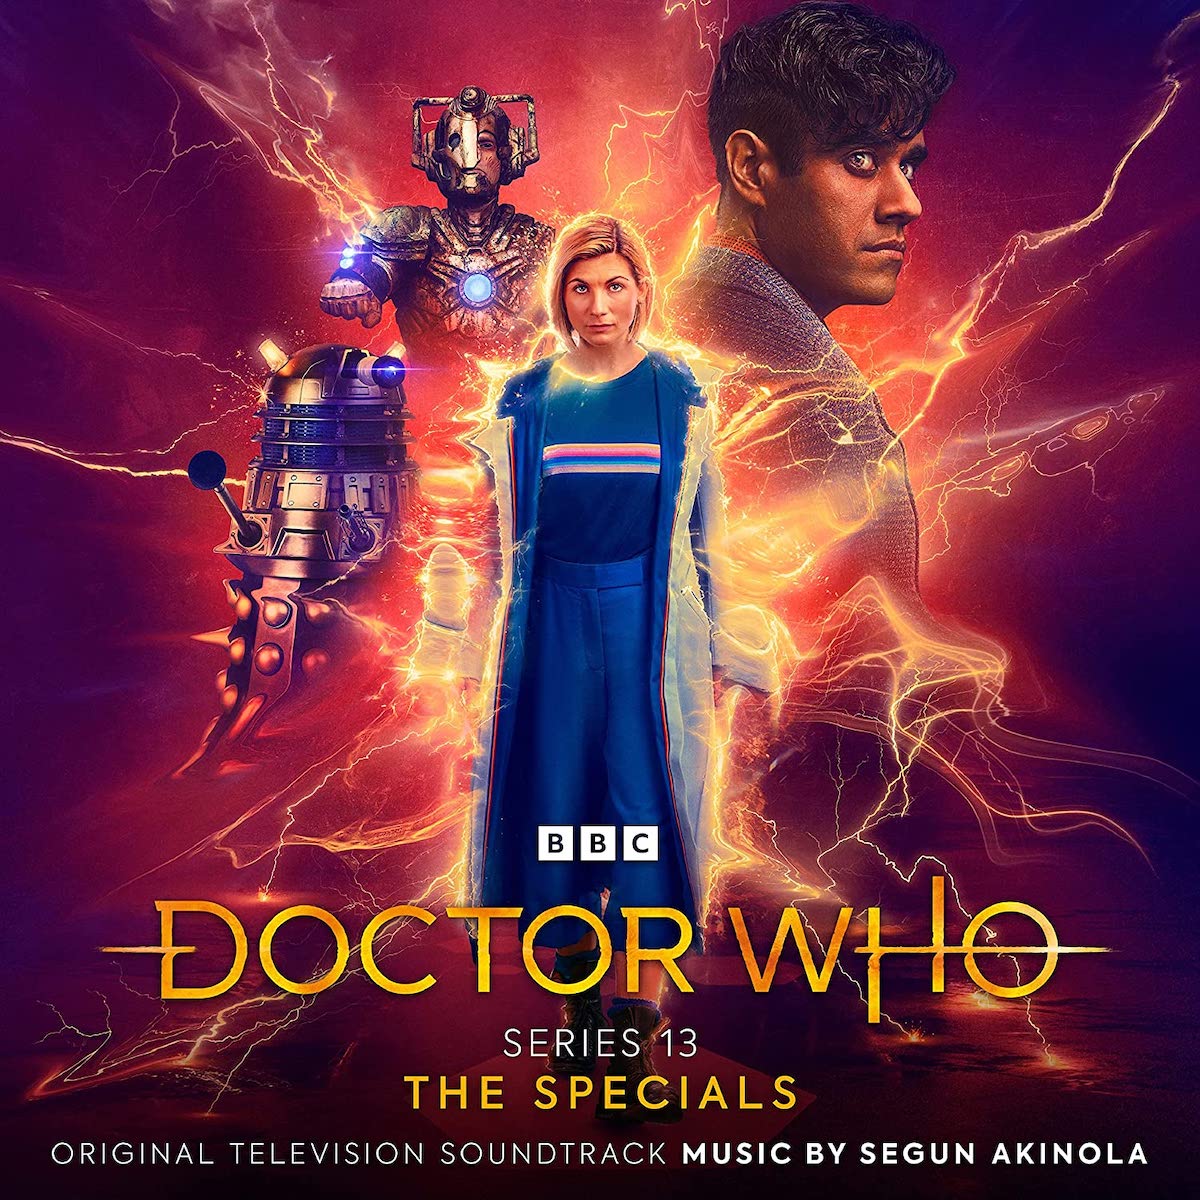 Doctor Who Series 13 - The Specials Soundtrack